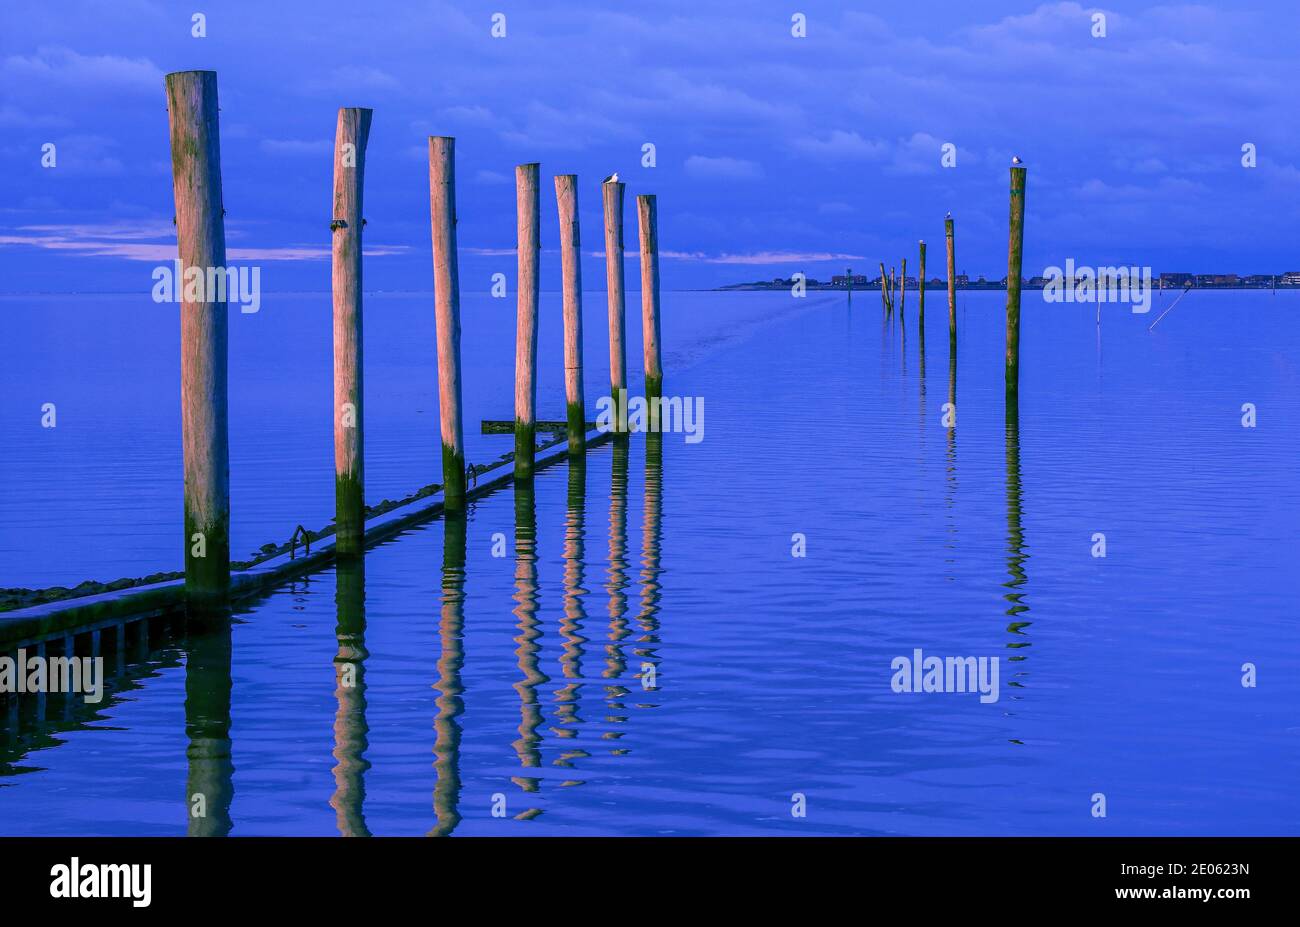 A windless evening on the North Sea, Germany. The wooden posts lead the view across the water to the small East Frisian island of Baltrum. Stock Photo